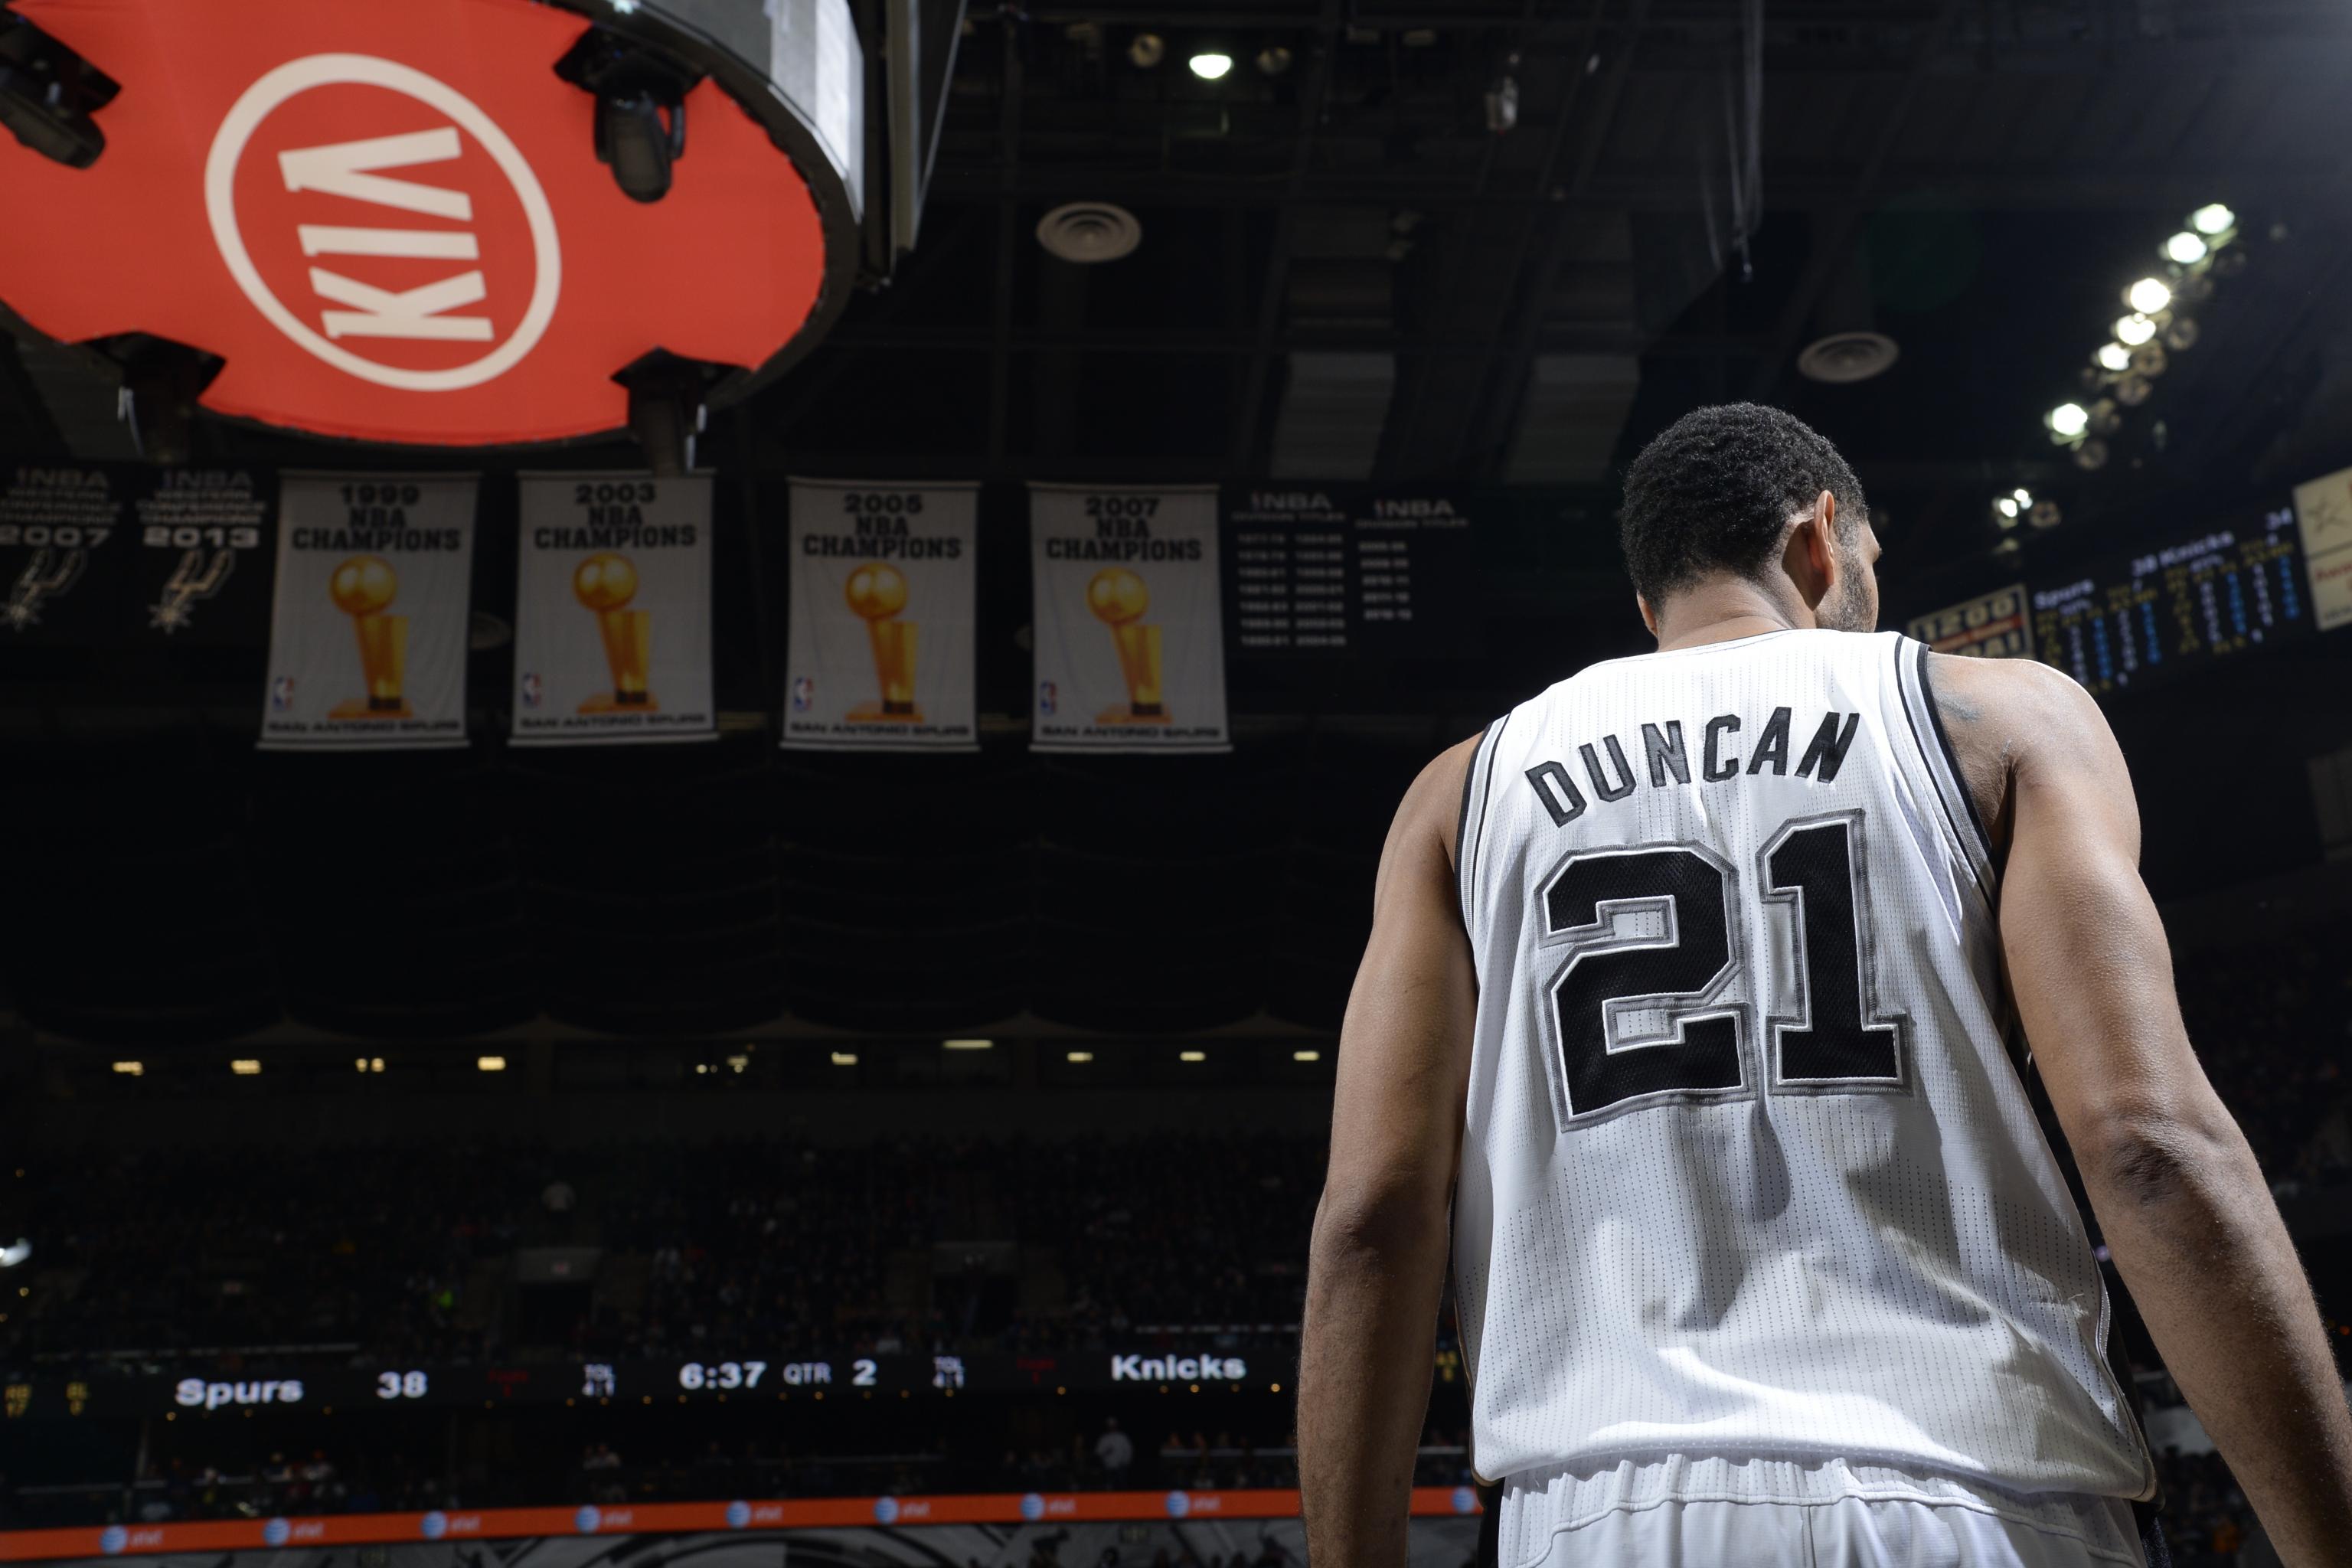 More details about Tim Duncan's jersey retirement - Pounding The Rock